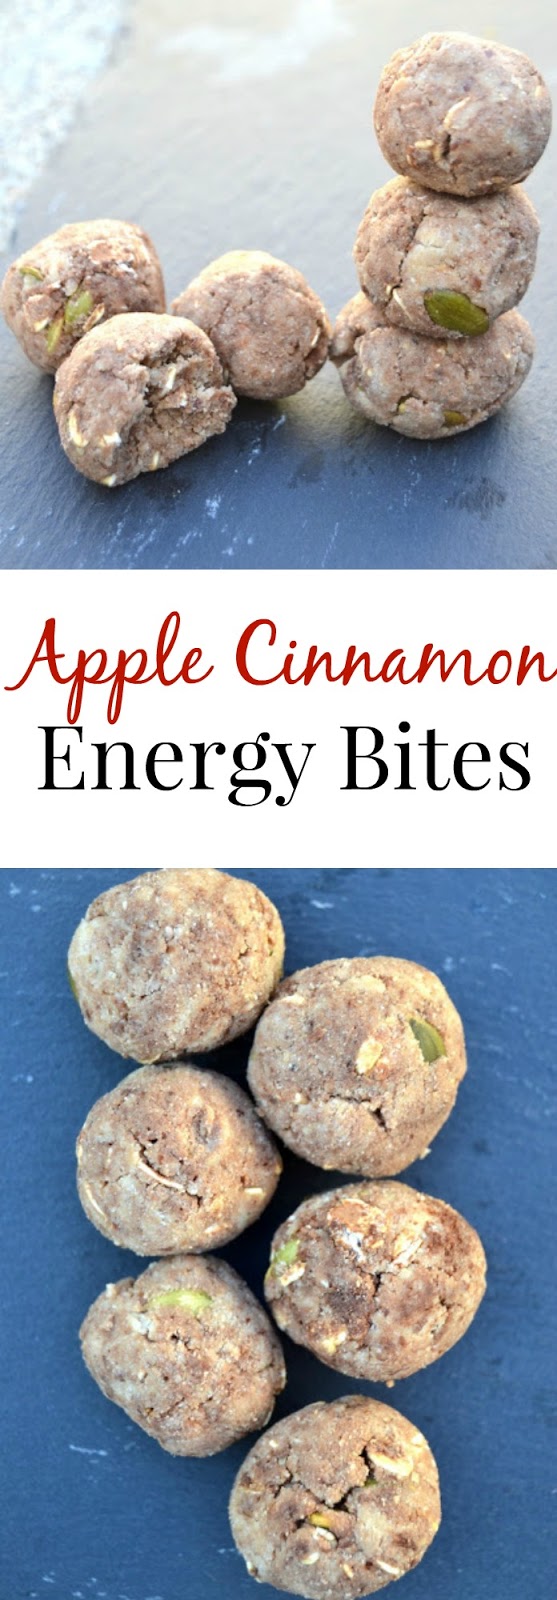 These Apple Cinnamon Energy Bites are filling, tasty and high in protein and fiber to keep you full. www.nutritionistreviews.com